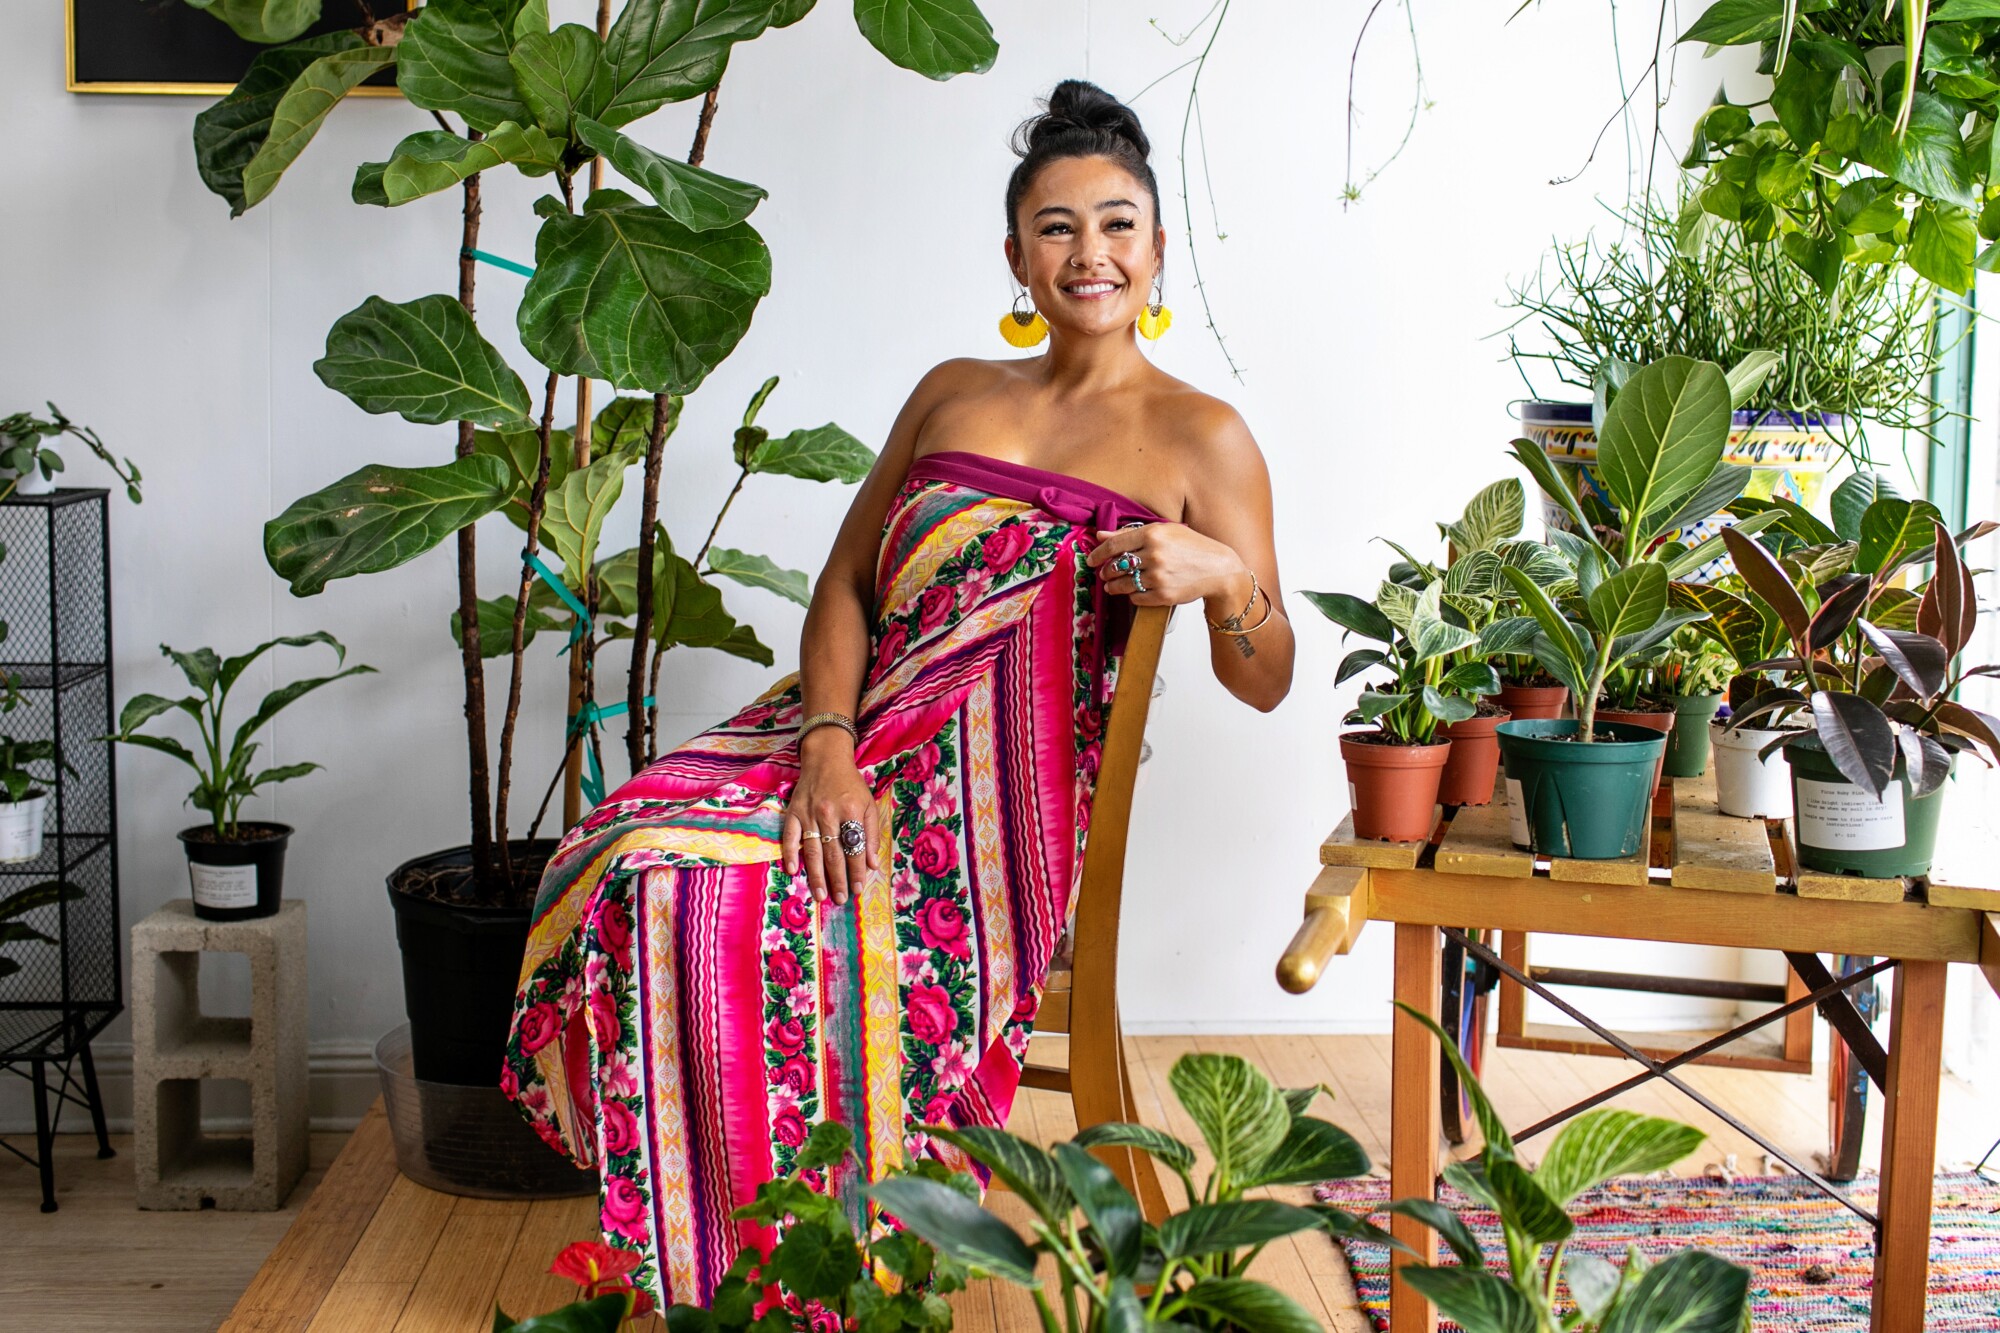 A woman sits in a chair surrounded by potted plants indoors.